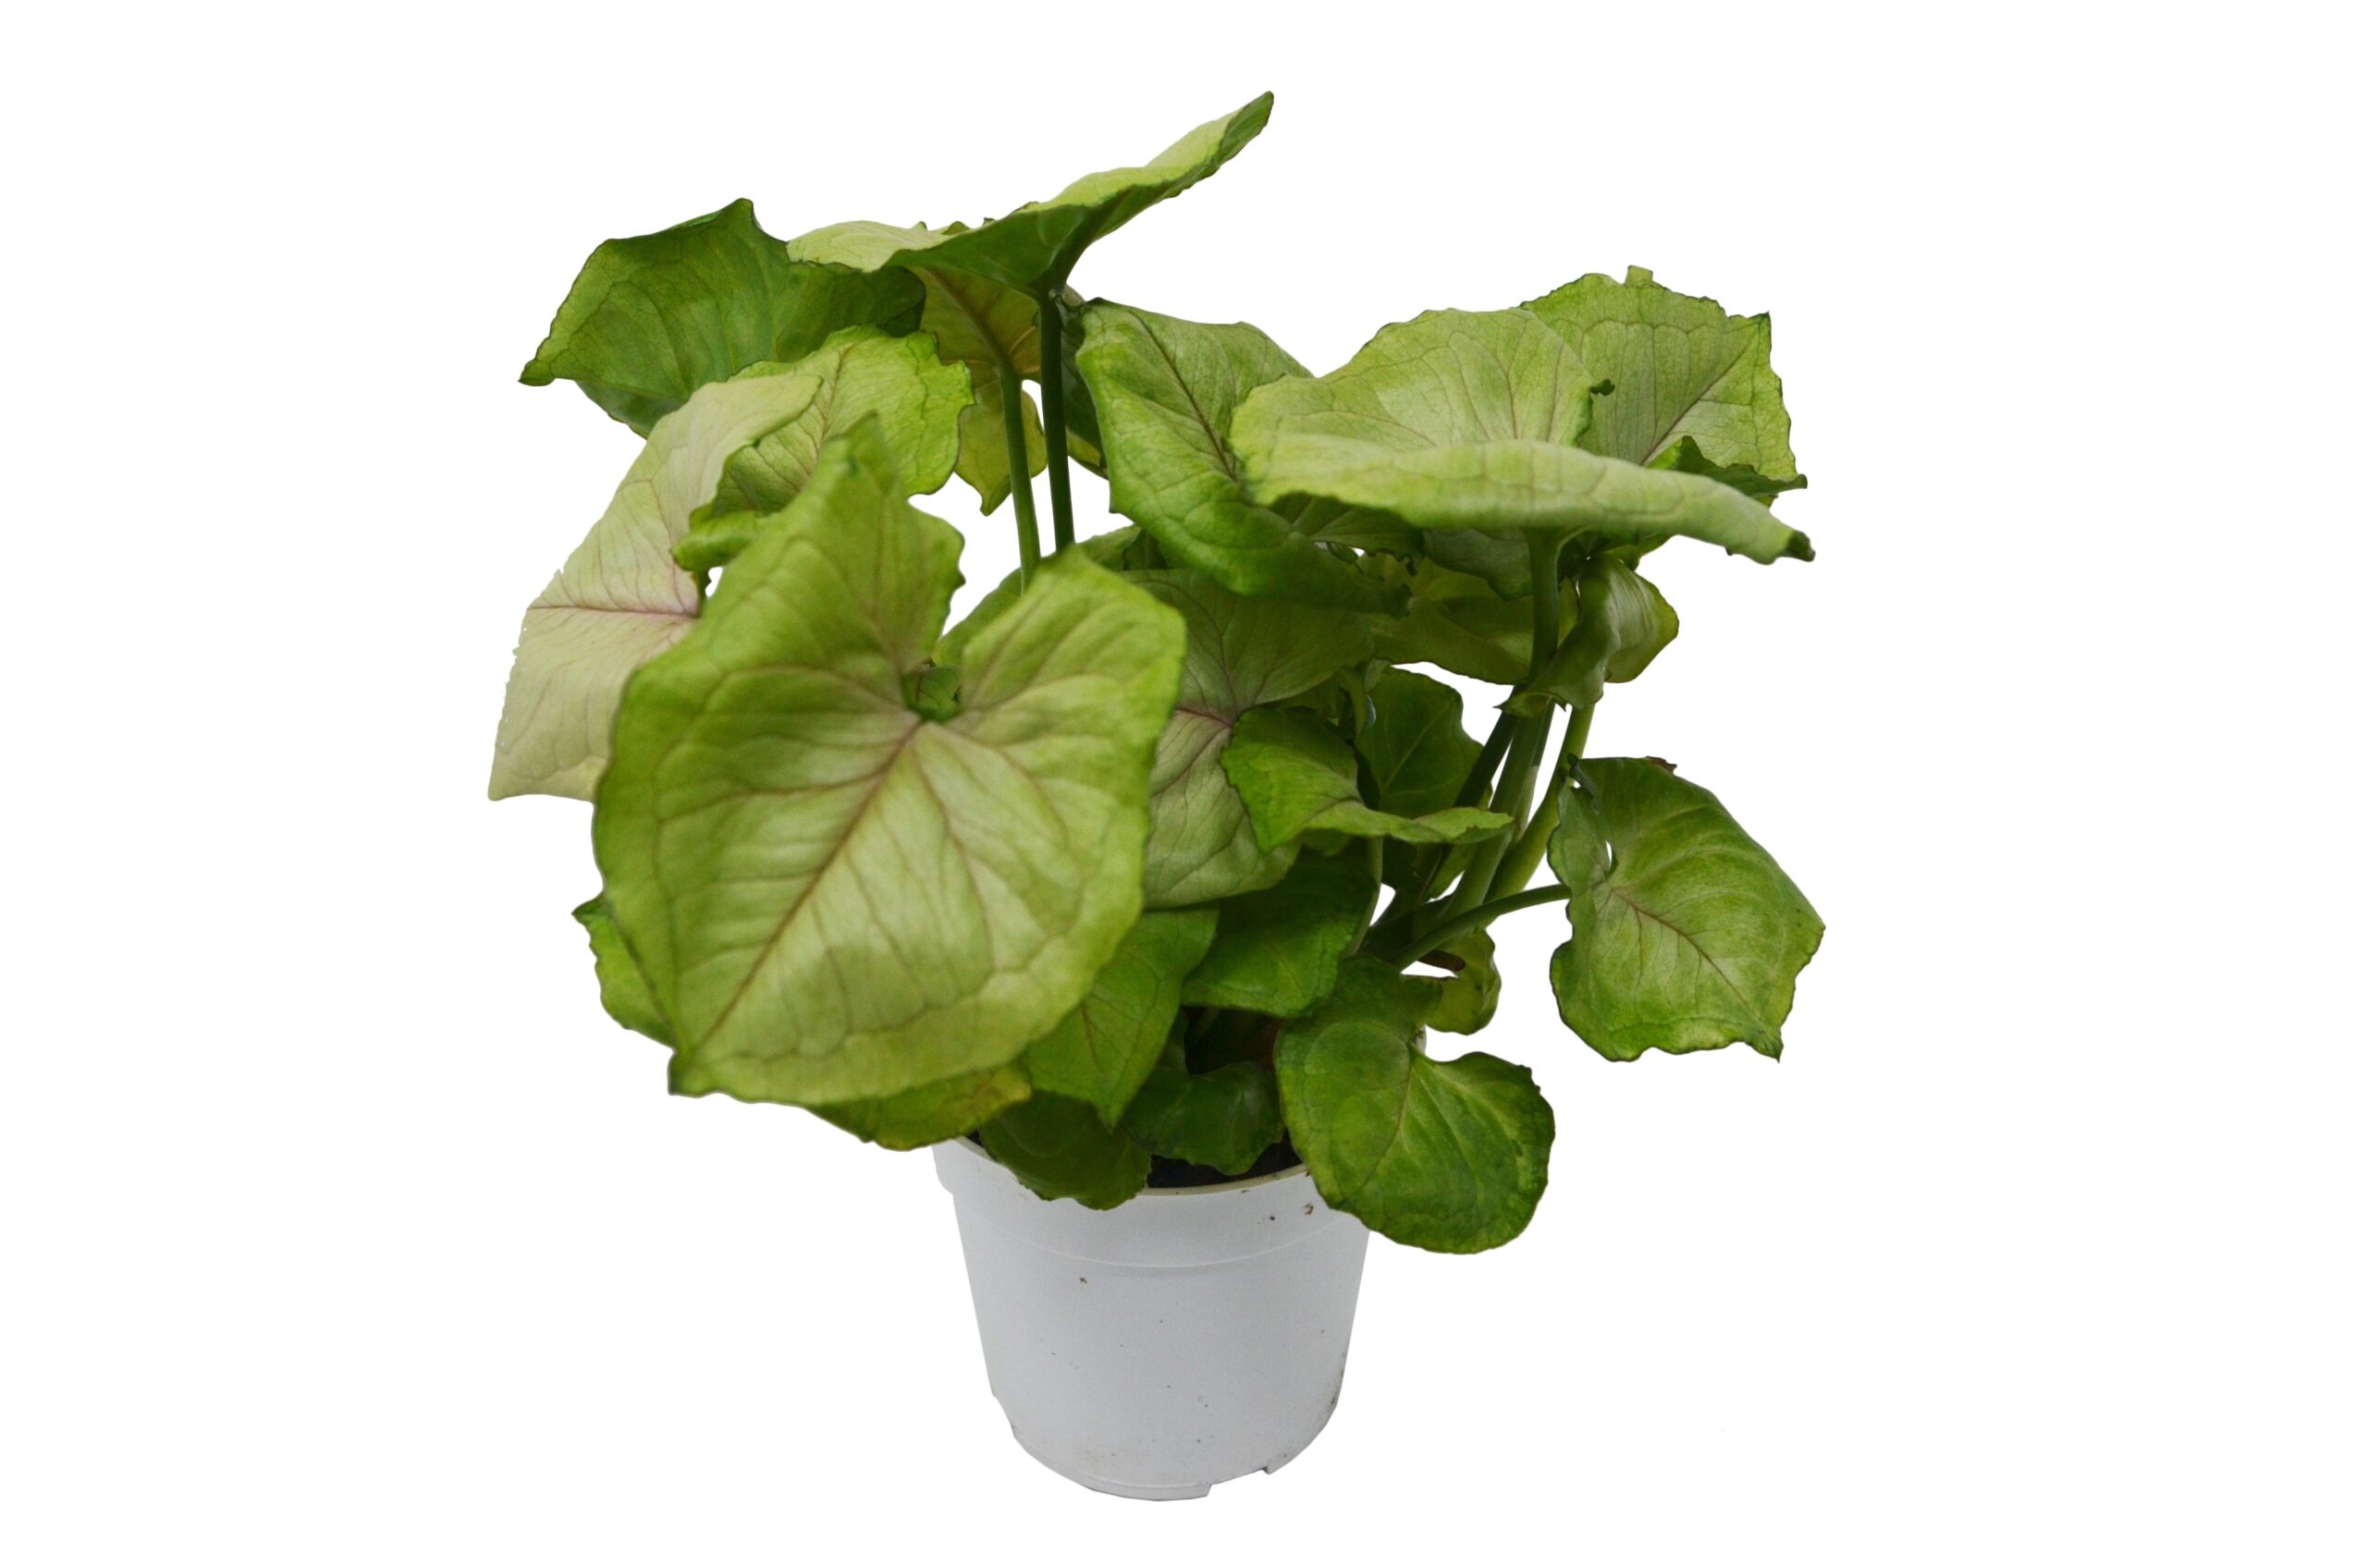 A top garden center near me offers a plant in a white pot with green leaves.